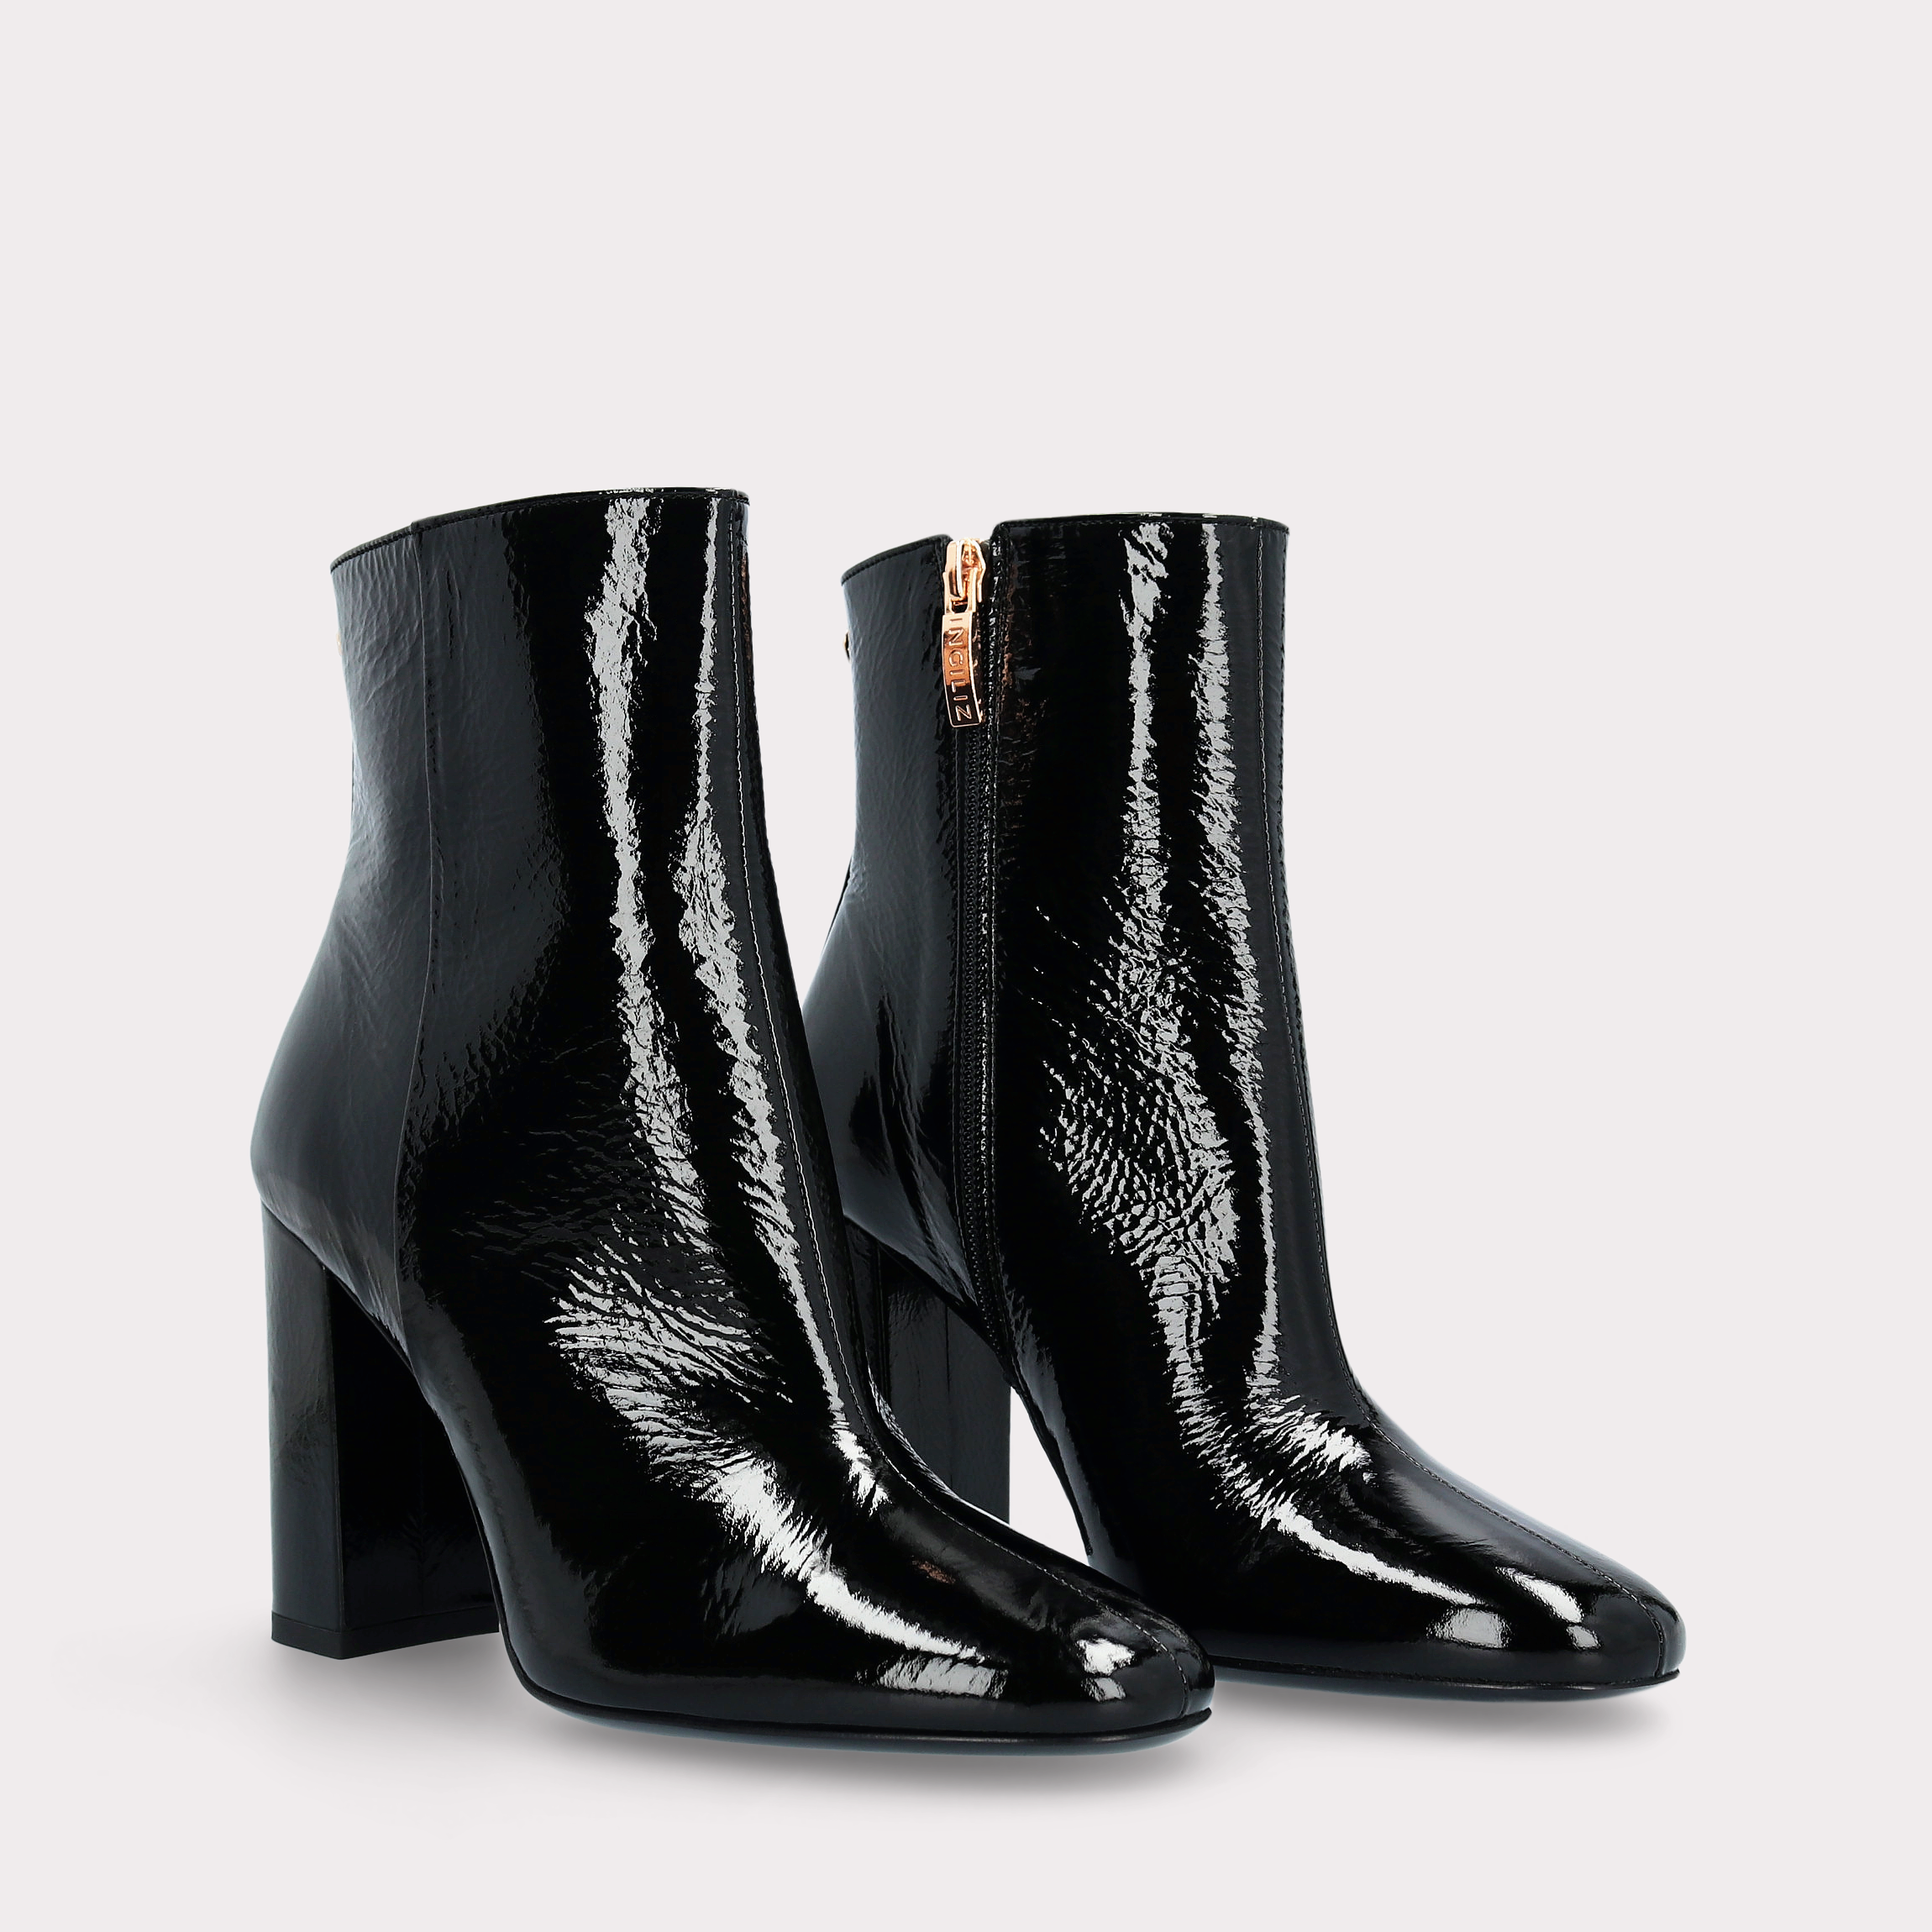 DELMA ZIP 02 BLACK CRUSHED PATENT LEATHER ANKLE BOOTS